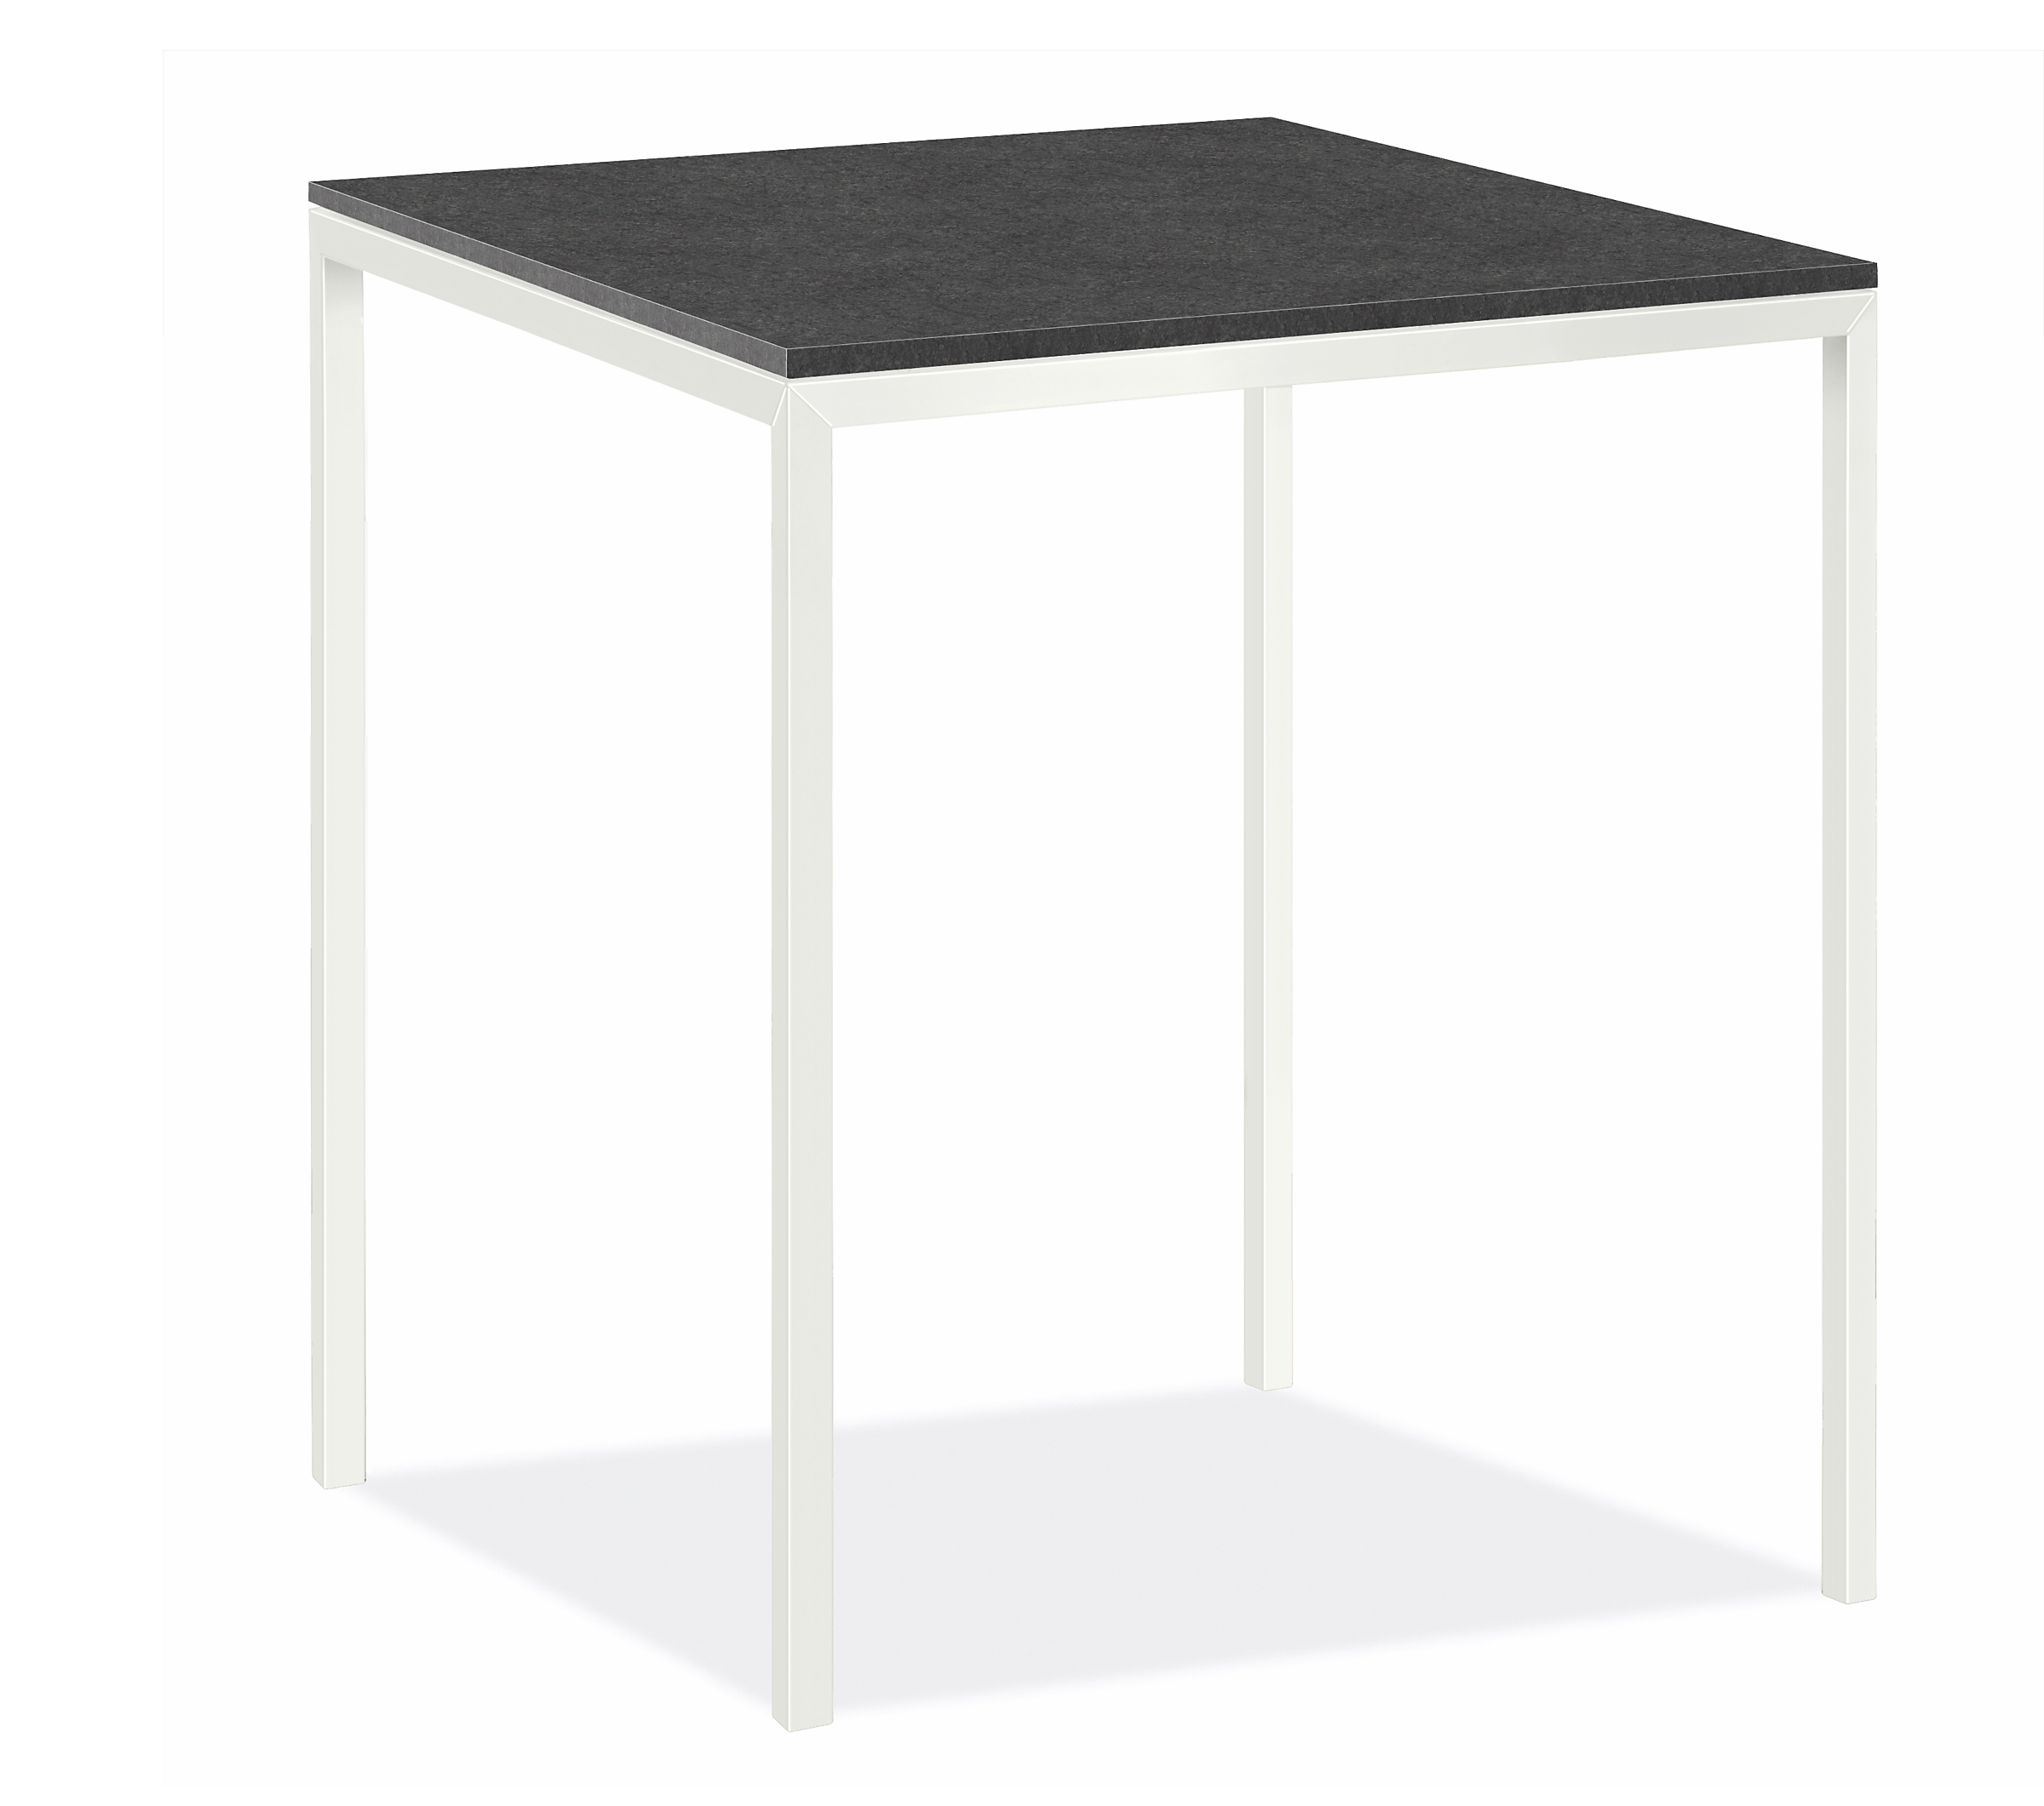 Parsons 36w 36d 42h Bar Table with 1.5" Leg